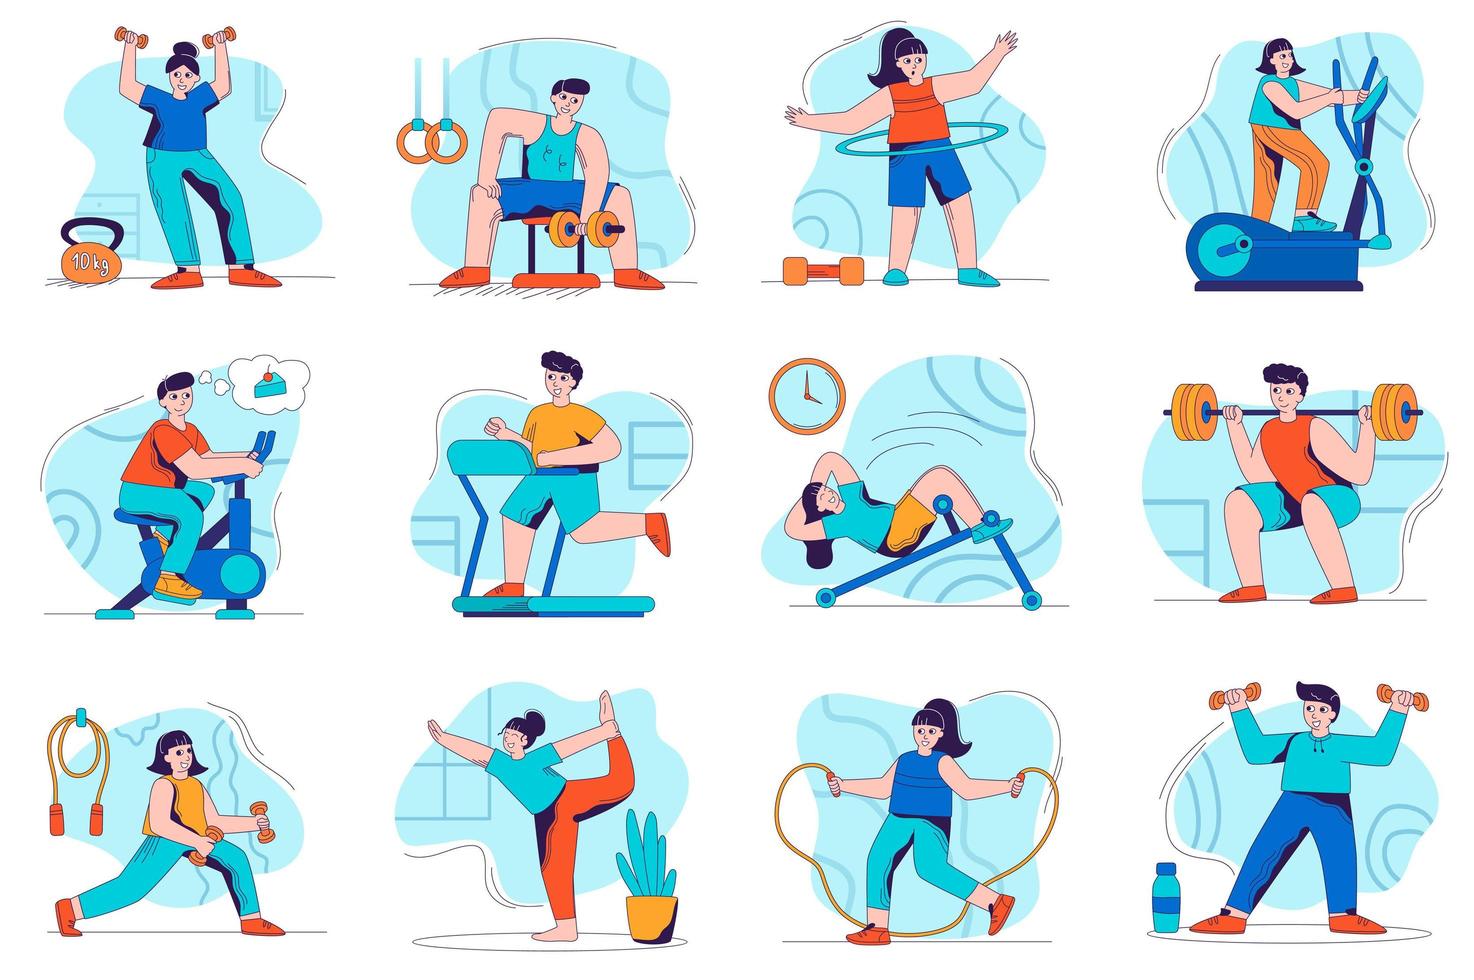 Fitness concept isolated person situations. Collection of scenes with people exercise at gym, doing weightlifting, cycling, doing yoga or jumping rope. Mega set. Vector illustration in flat design